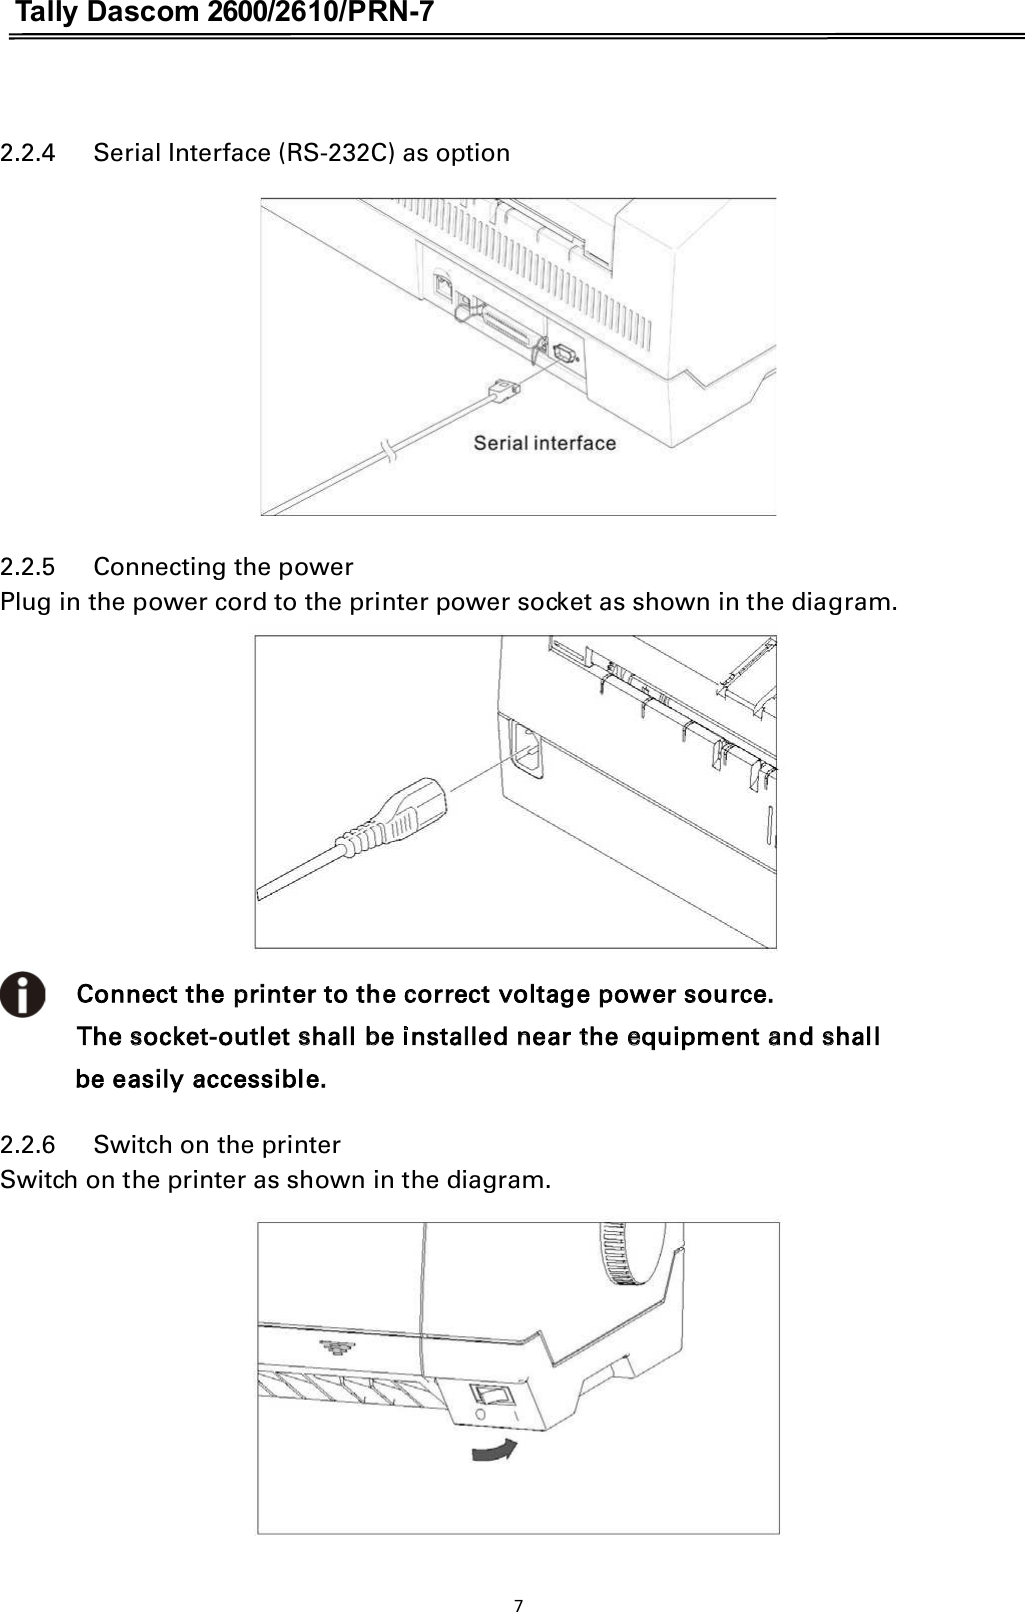 Tally Dascom 2600/2610/PRN-7   2.2.4      Serial Interface (RS-232C) as option   2.2.5      Connecting the power Plug in the power cord to the printer power socket as shown in the diagram.     Connect the printer to the correct voltage power source.    The socket-outlet shall be installed near the equipment and shall   be easily accessible. 2.2.6      Switch on the printer Switch on the printer as shown in the diagram.  7  